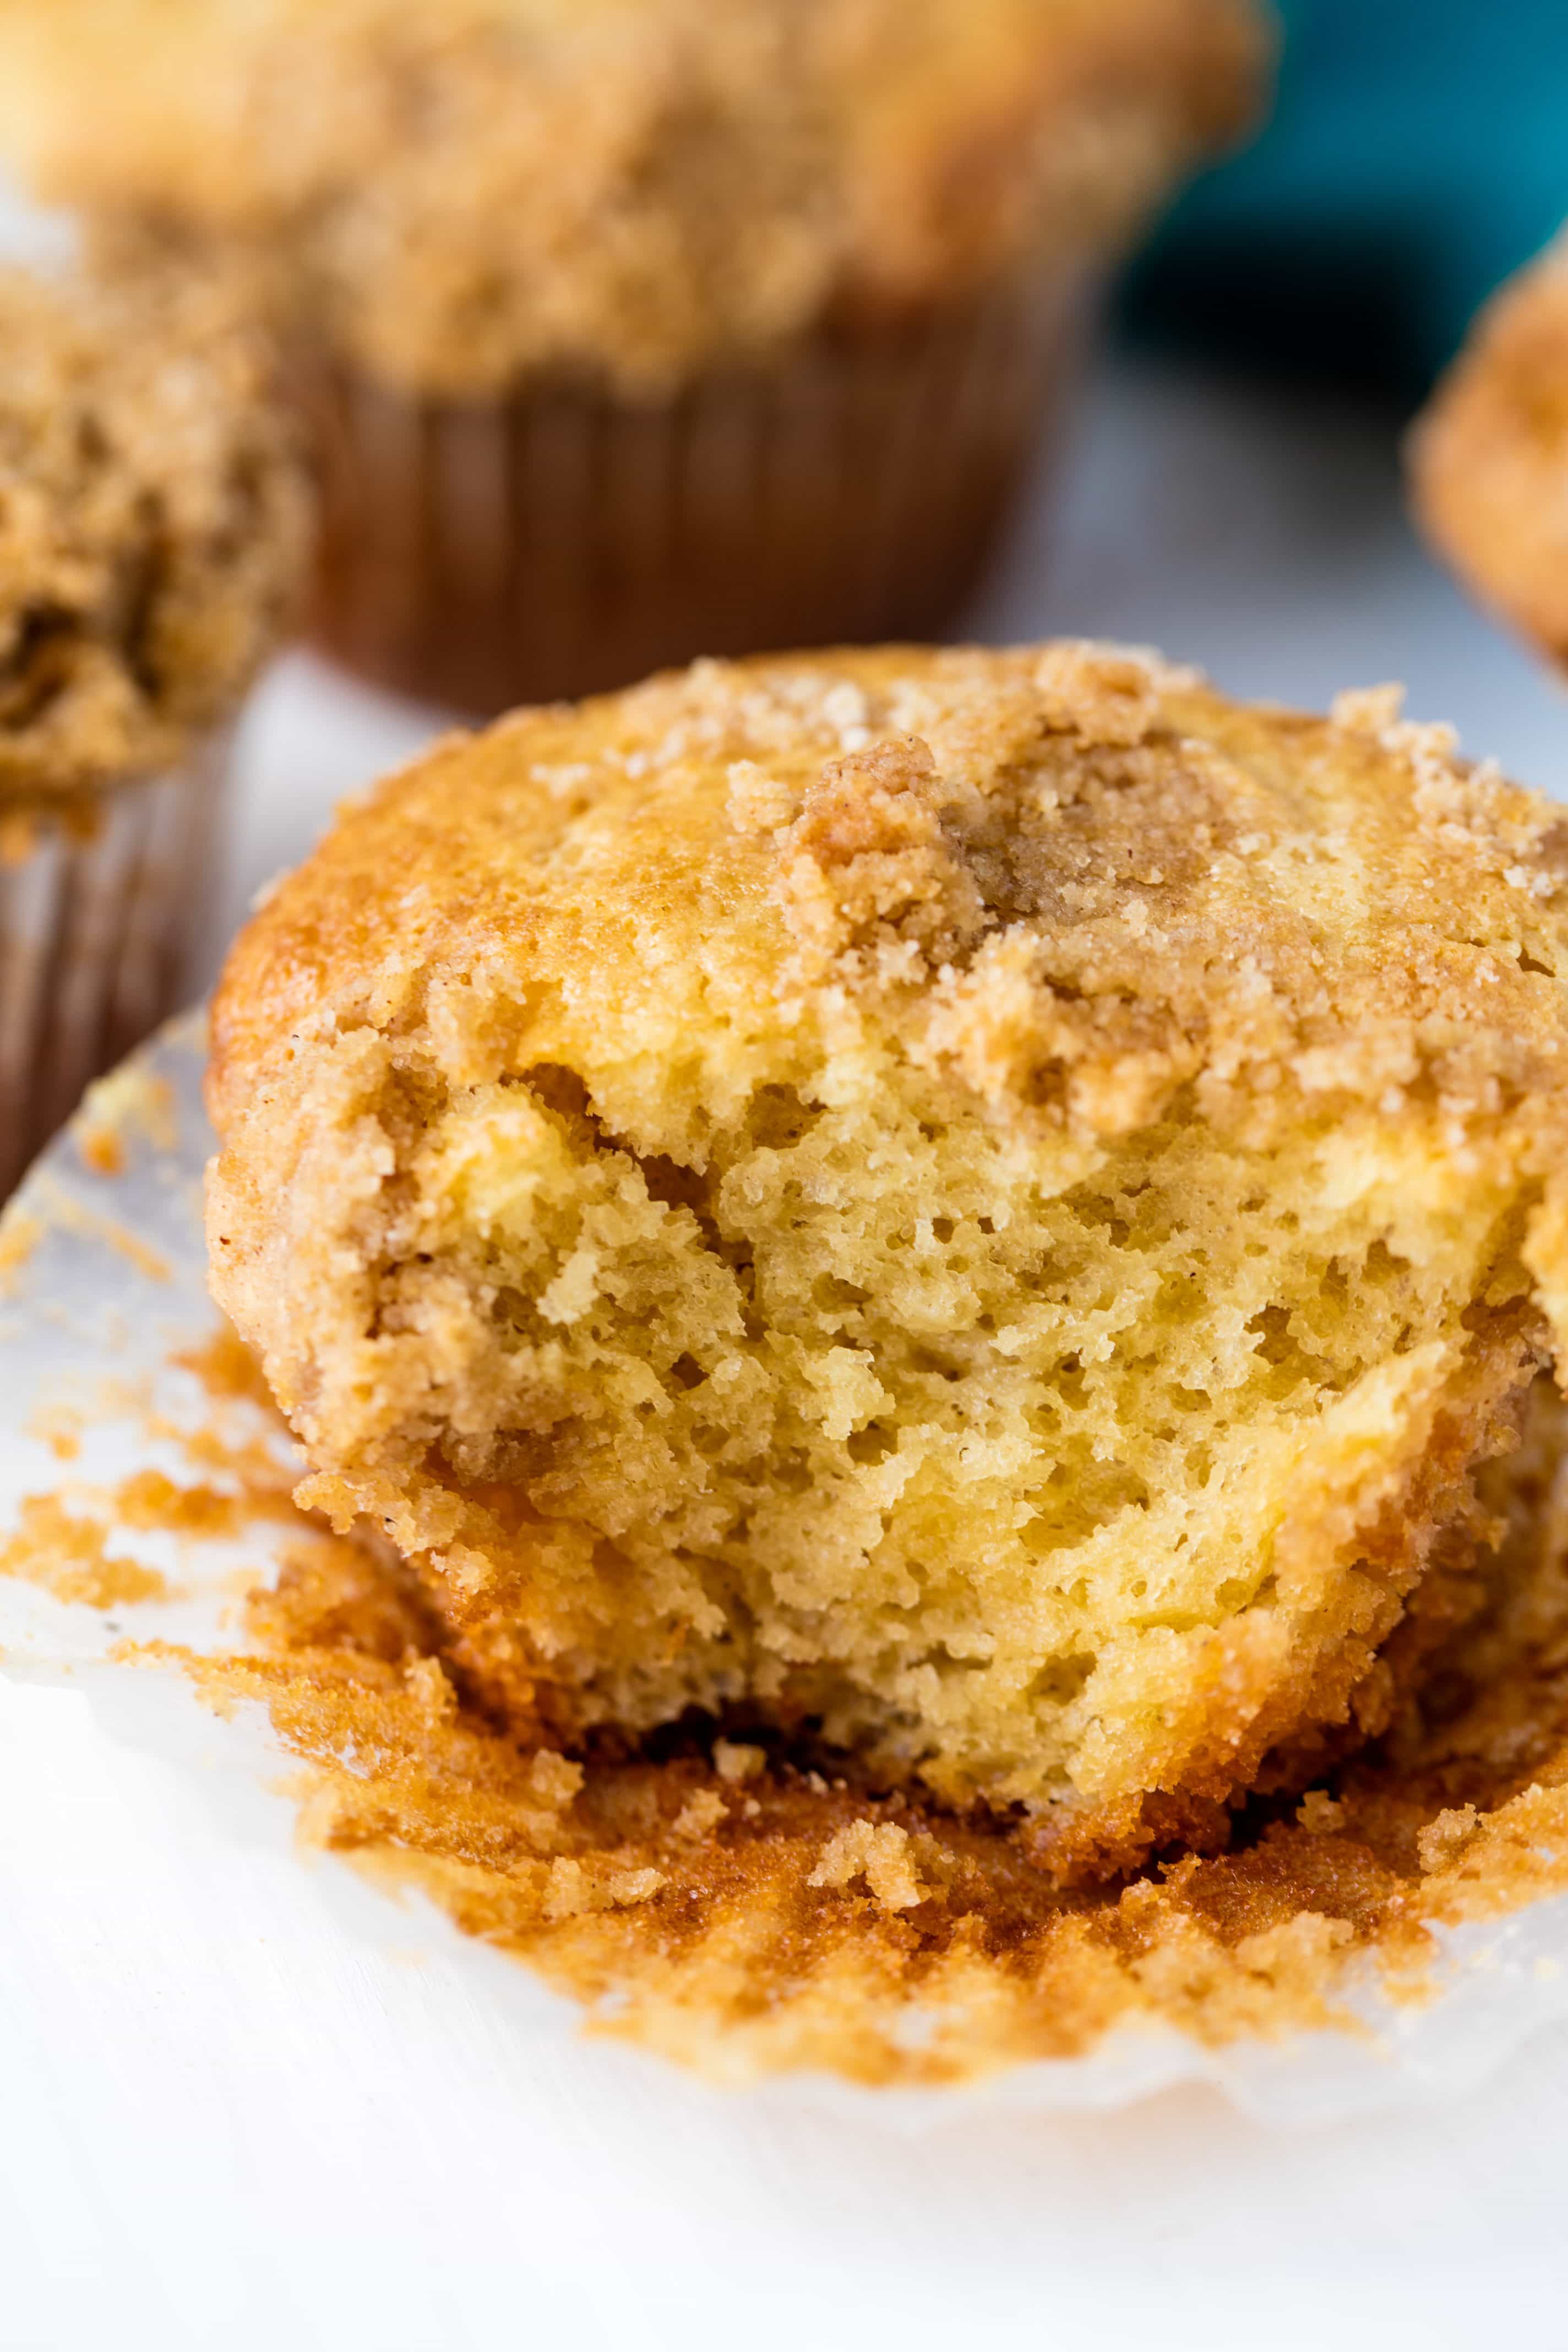 Sour Cream Coffee Cake Muffins are super moist and topped with the most delicious streusel topping. You'll love these classic muffins!